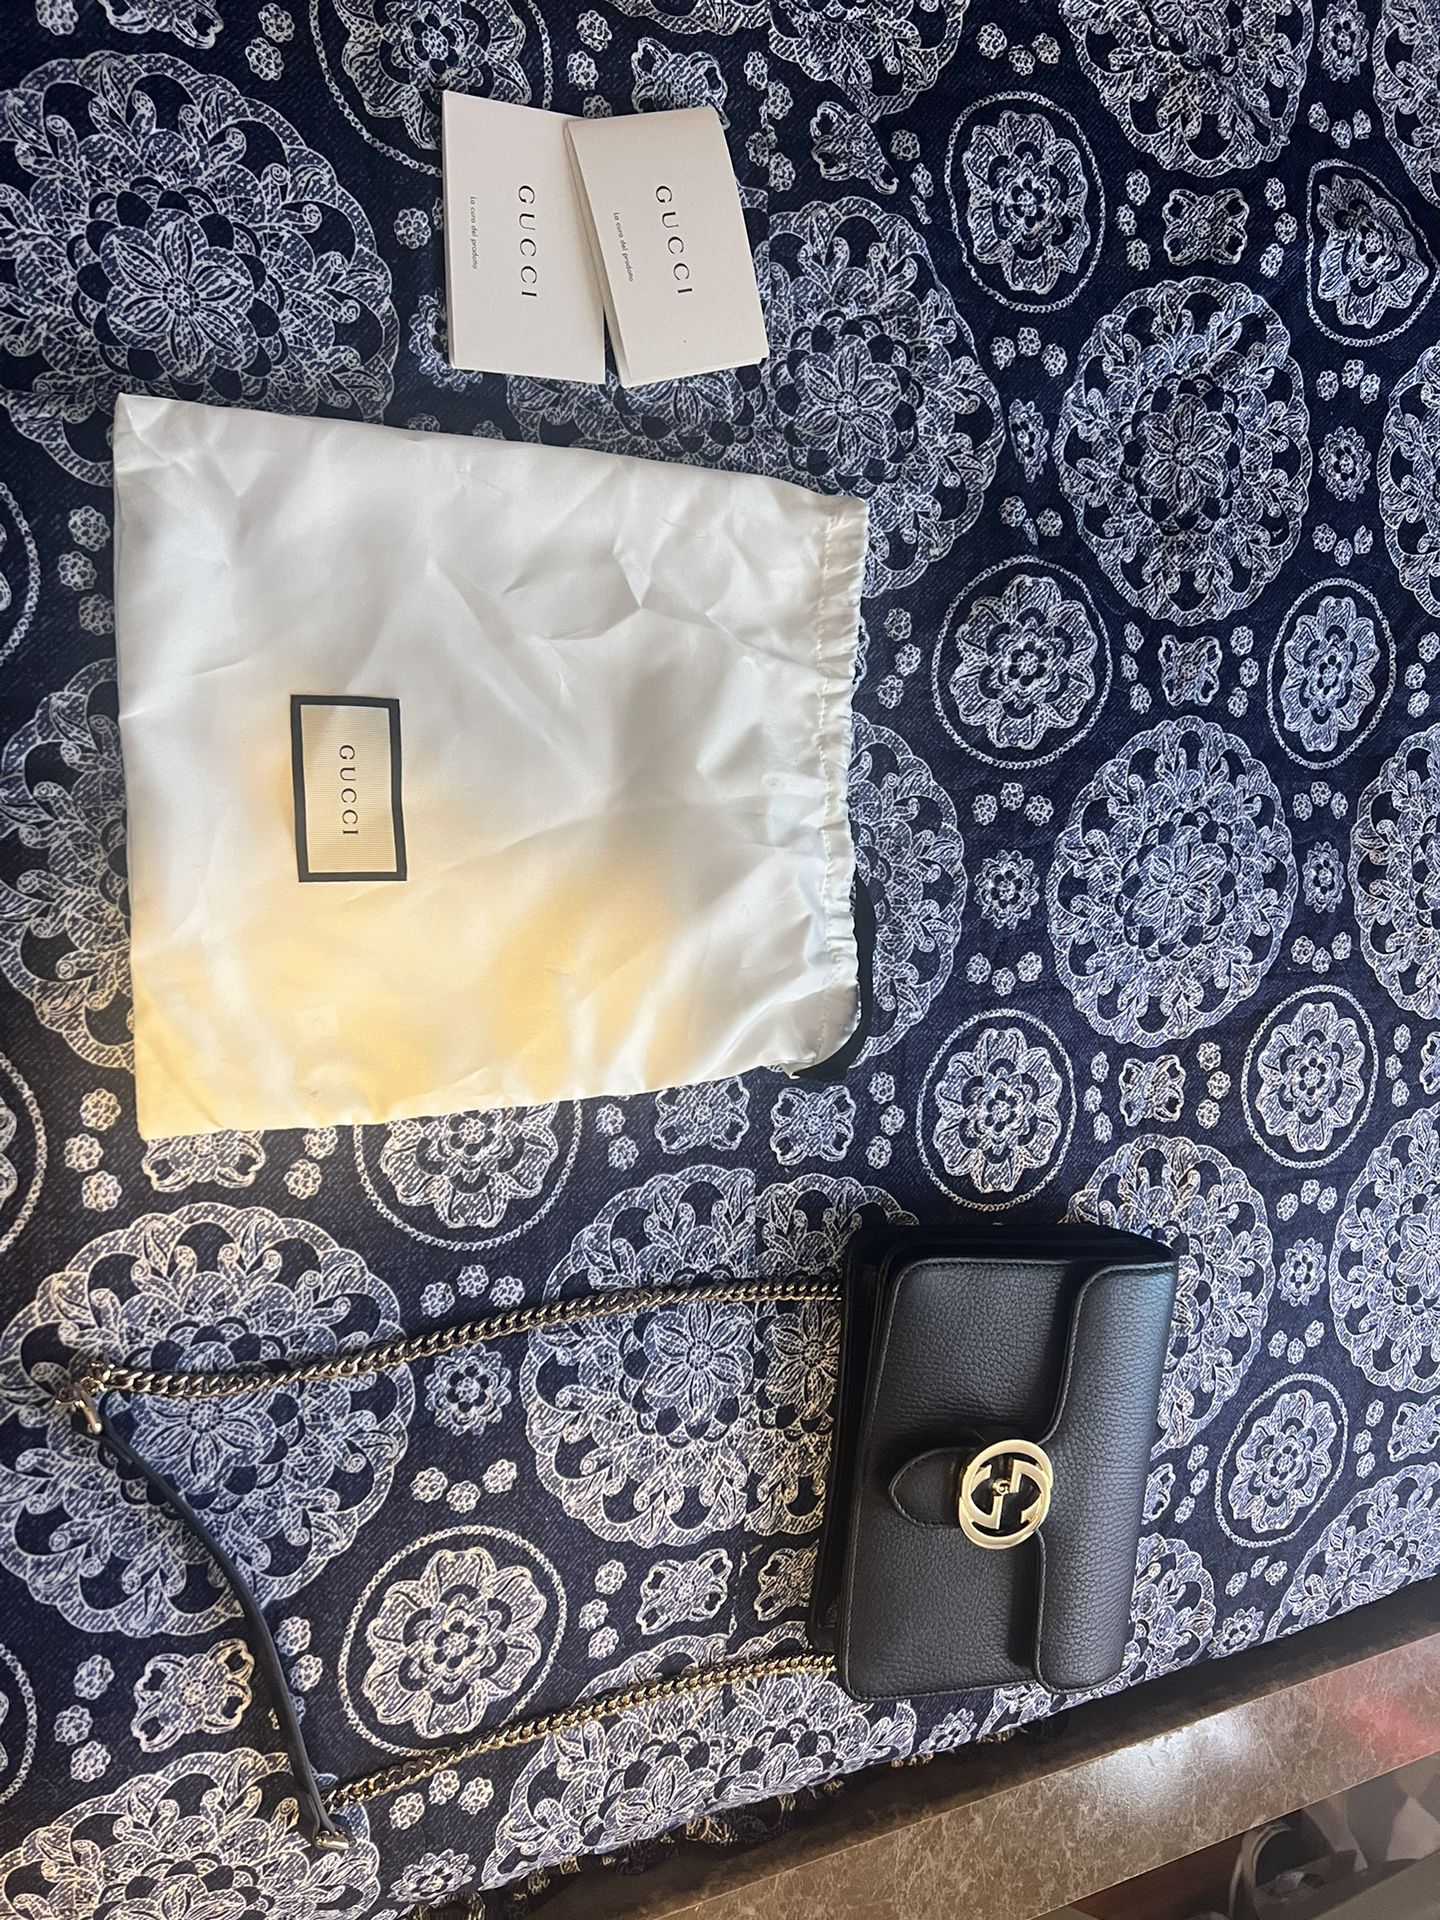 Gucci Bag For Sale